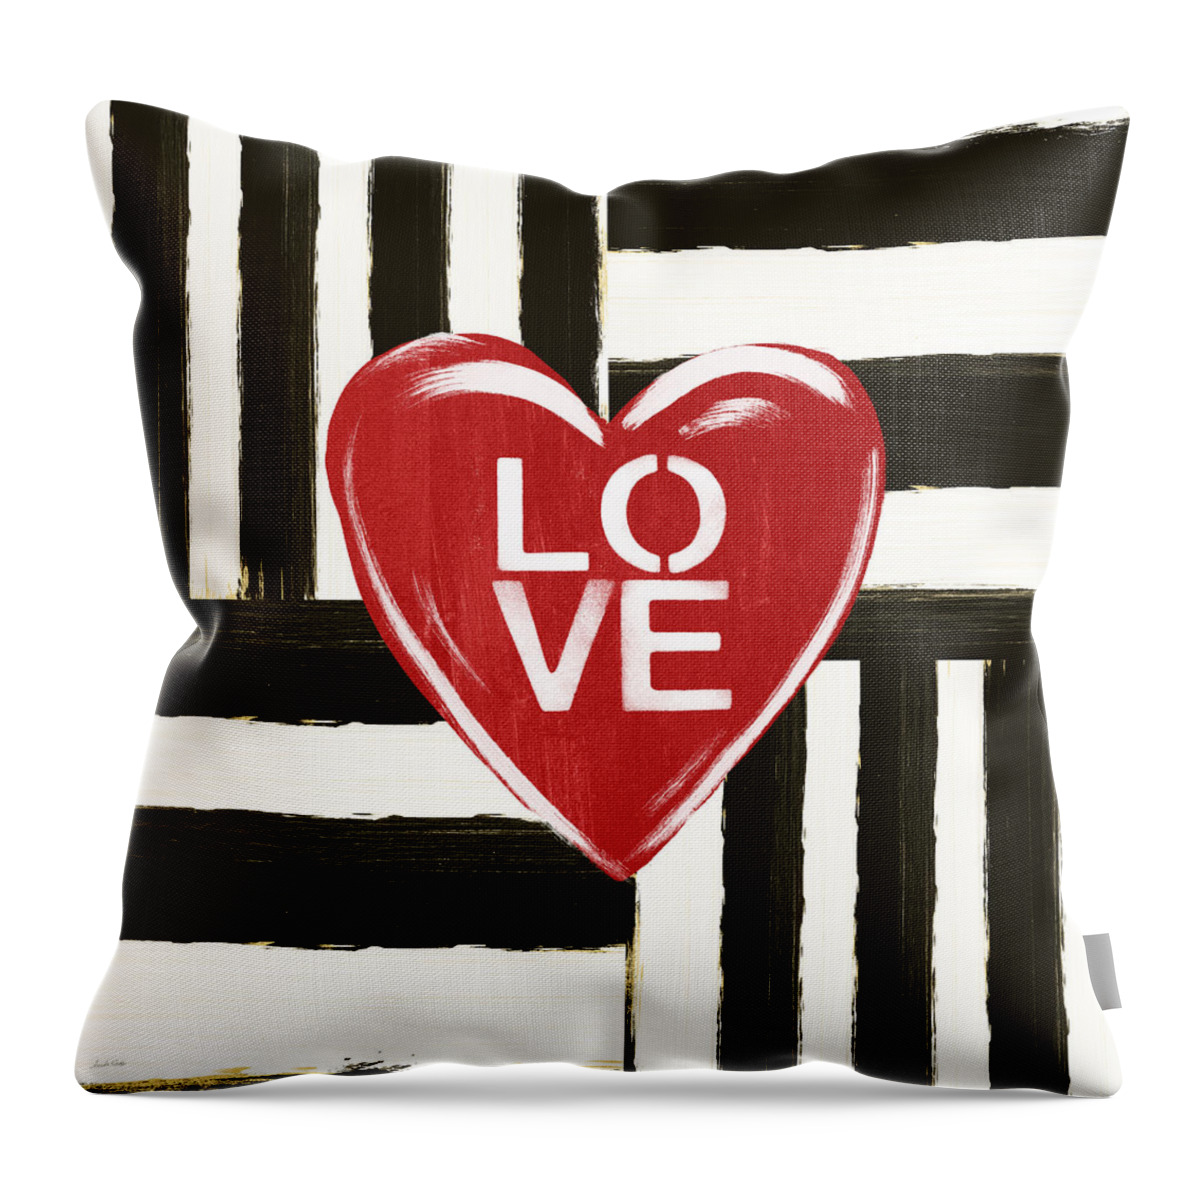 Love Throw Pillow featuring the painting Modern Love- Art by Linda Woods by Linda Woods